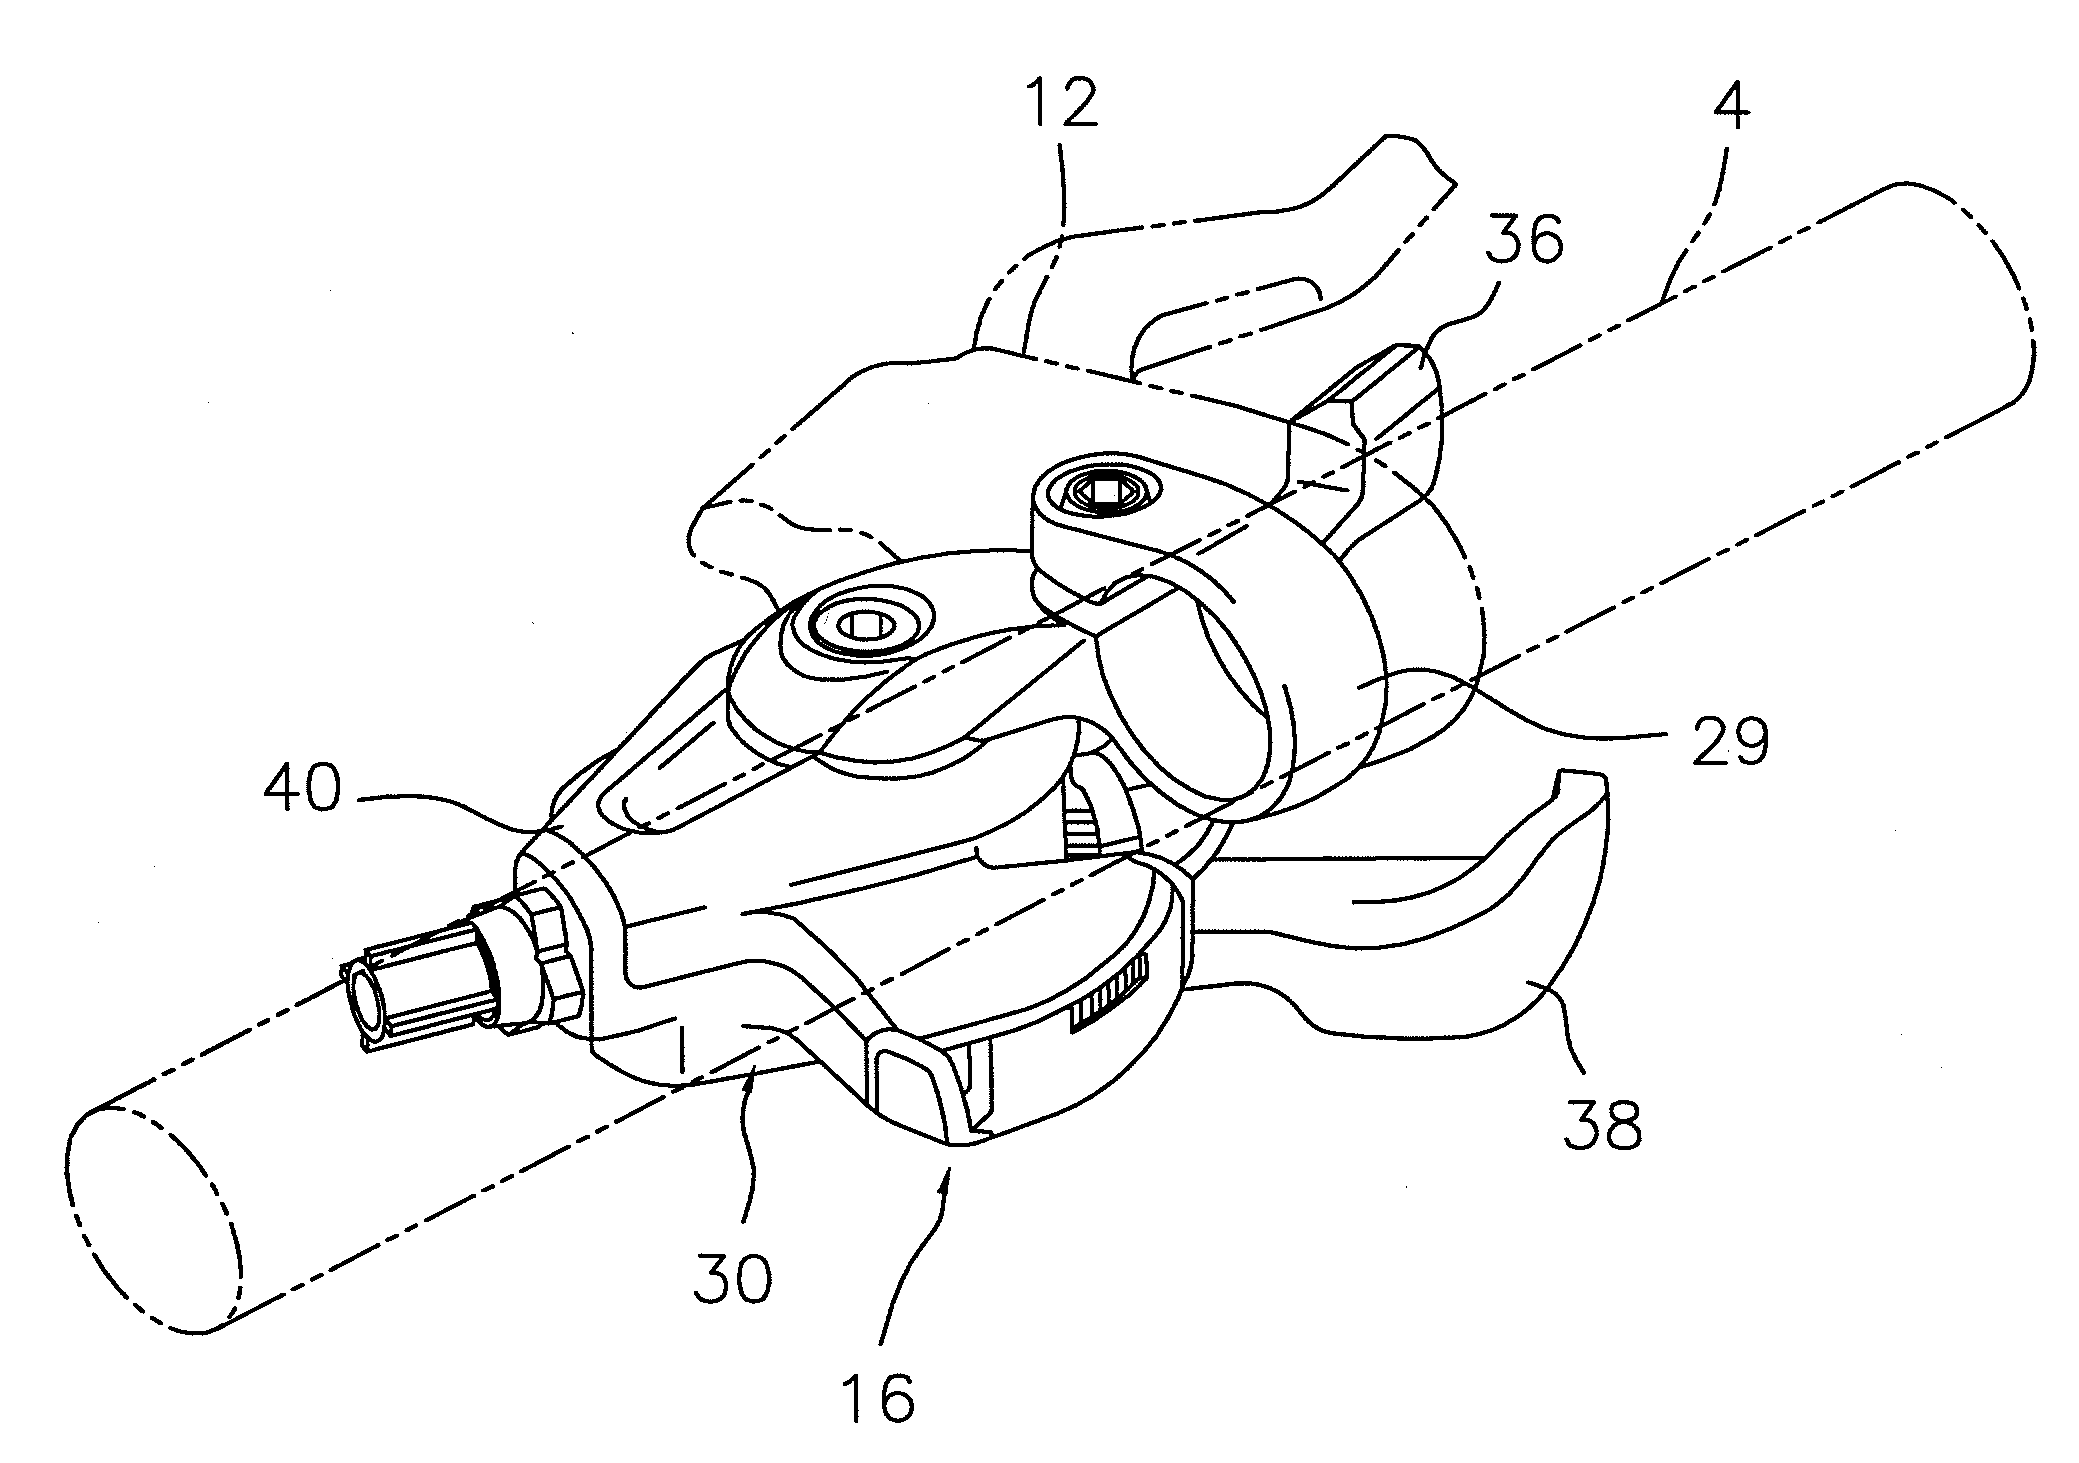 Bicycle operating device